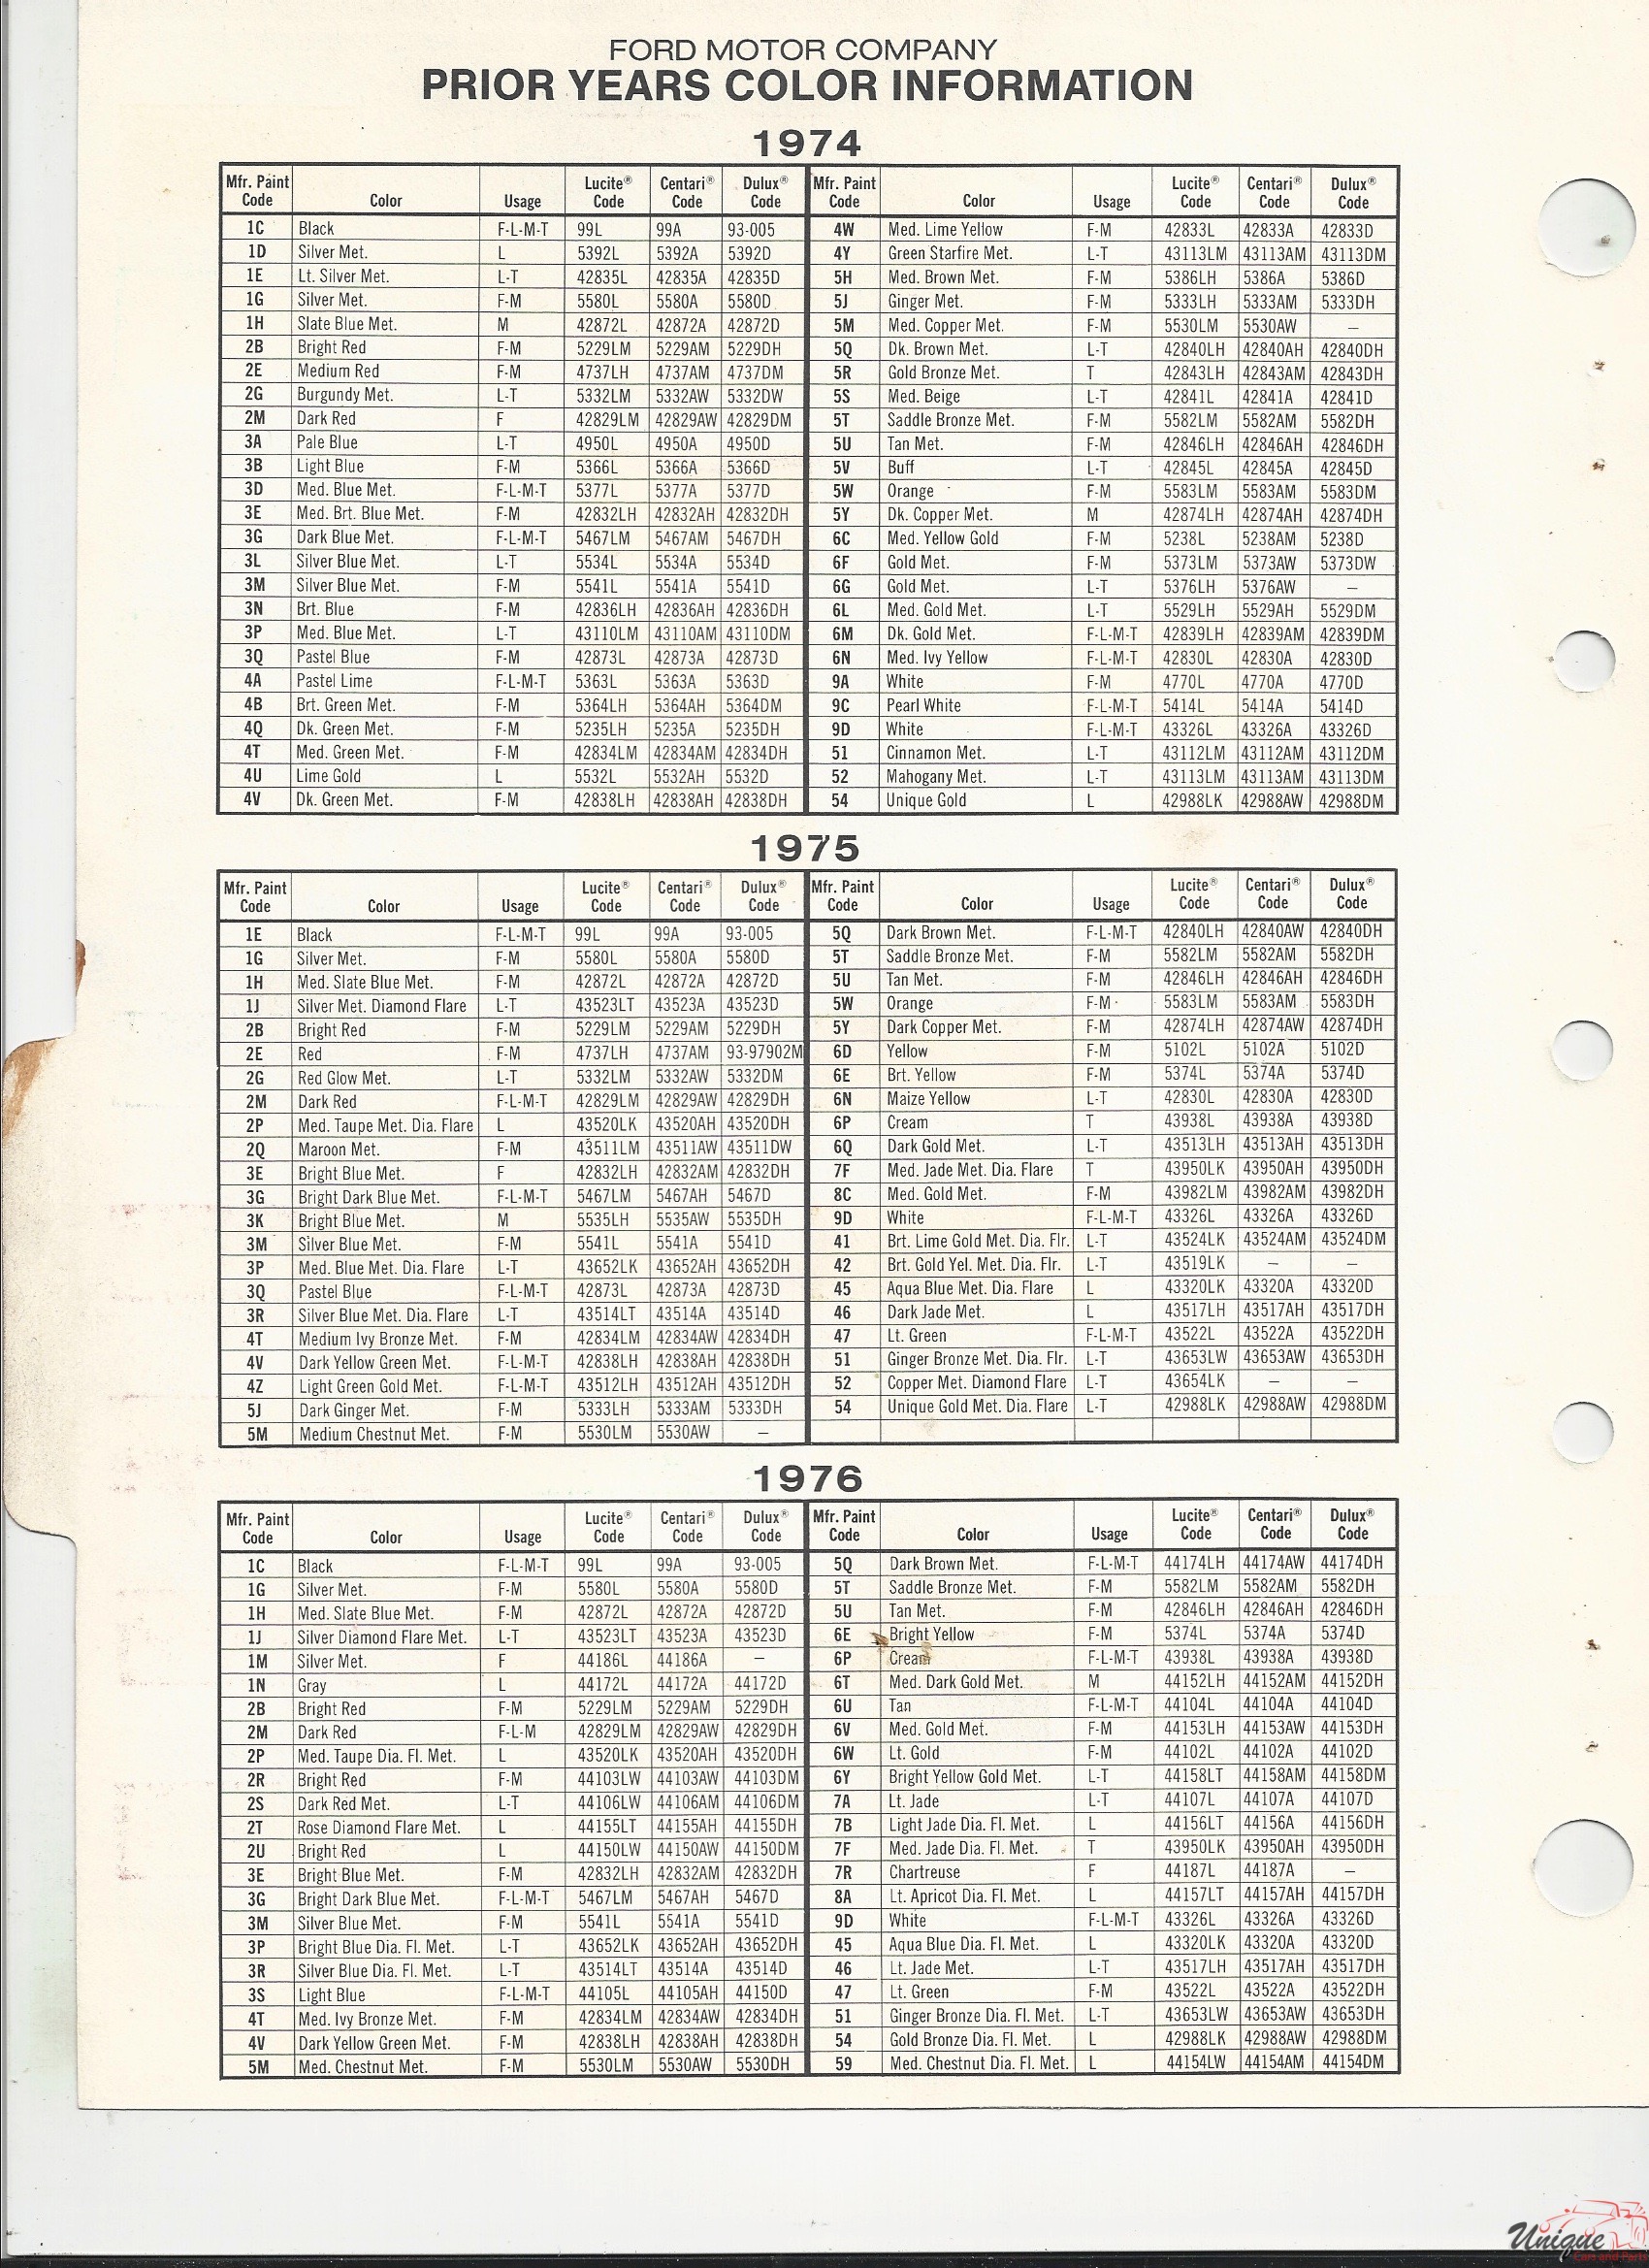 1977 Ford-1 Paint Charts